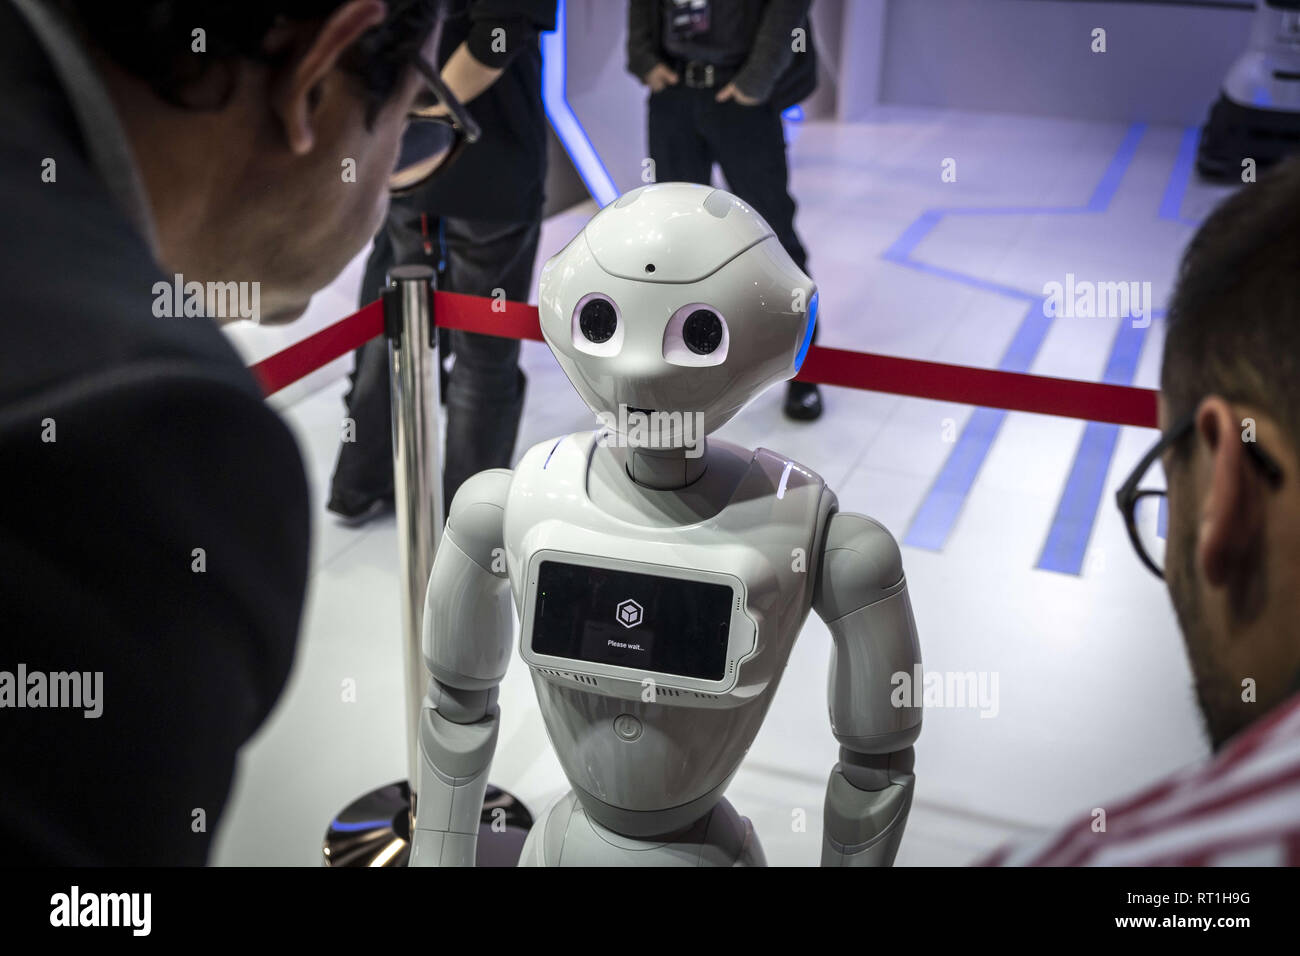 Barcelona, Catalonia, Spain. 27th Feb, 2019. The humanoid robot Pepper of  the American company Cloud-minds is seen during the MWC2019.The MWC2019  Mobile World Congress opens its doors to showcase the latest news